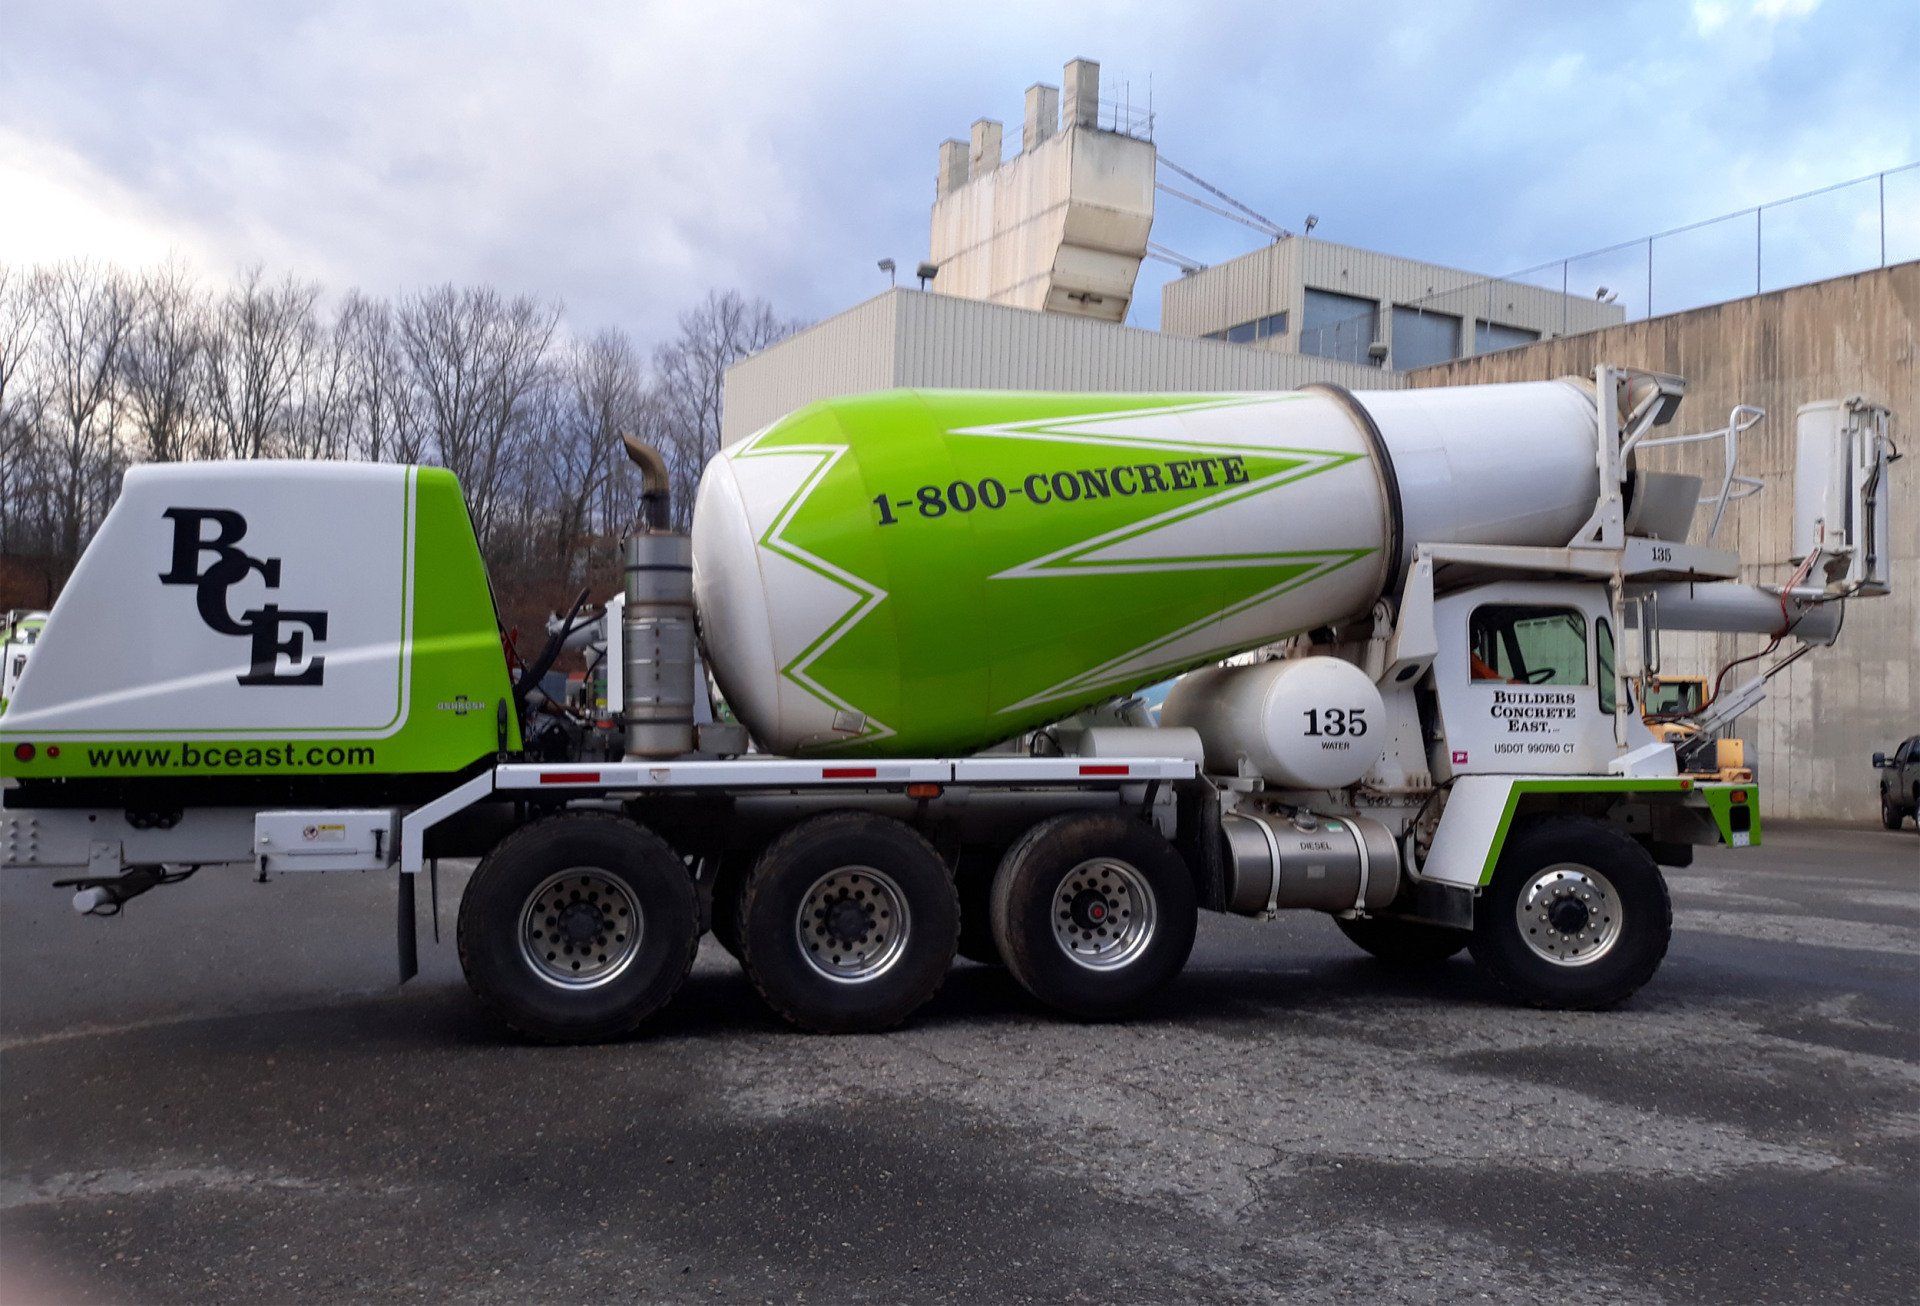 Contact Builders Concrete East | Westbrook CT | 860-399-9388